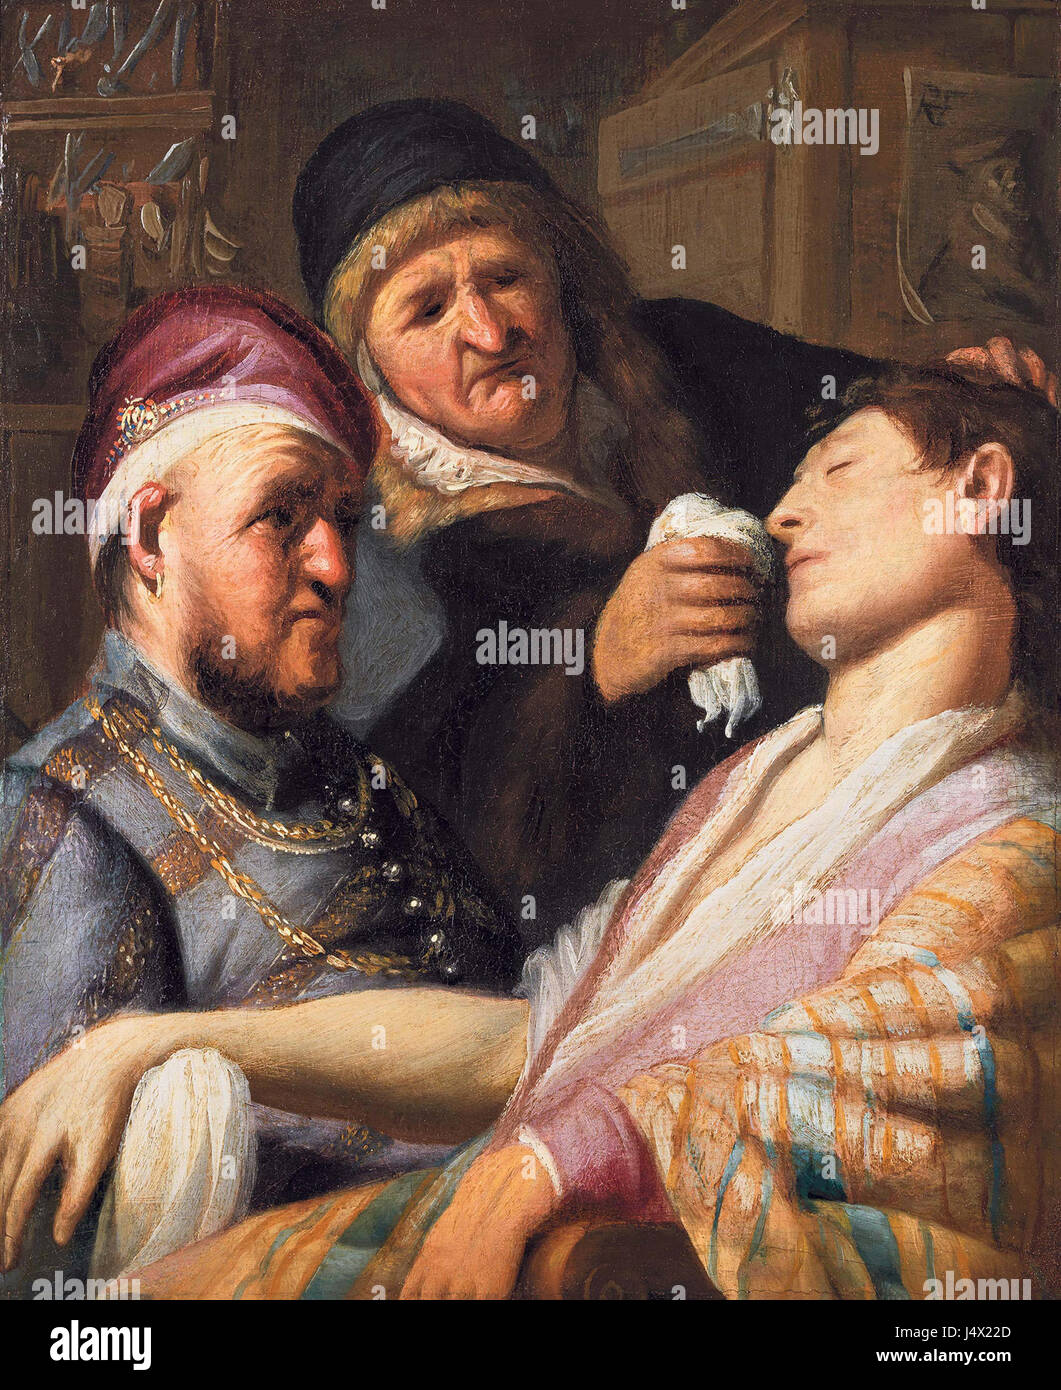 The fainted patient, by Rembrandt Stock Photo